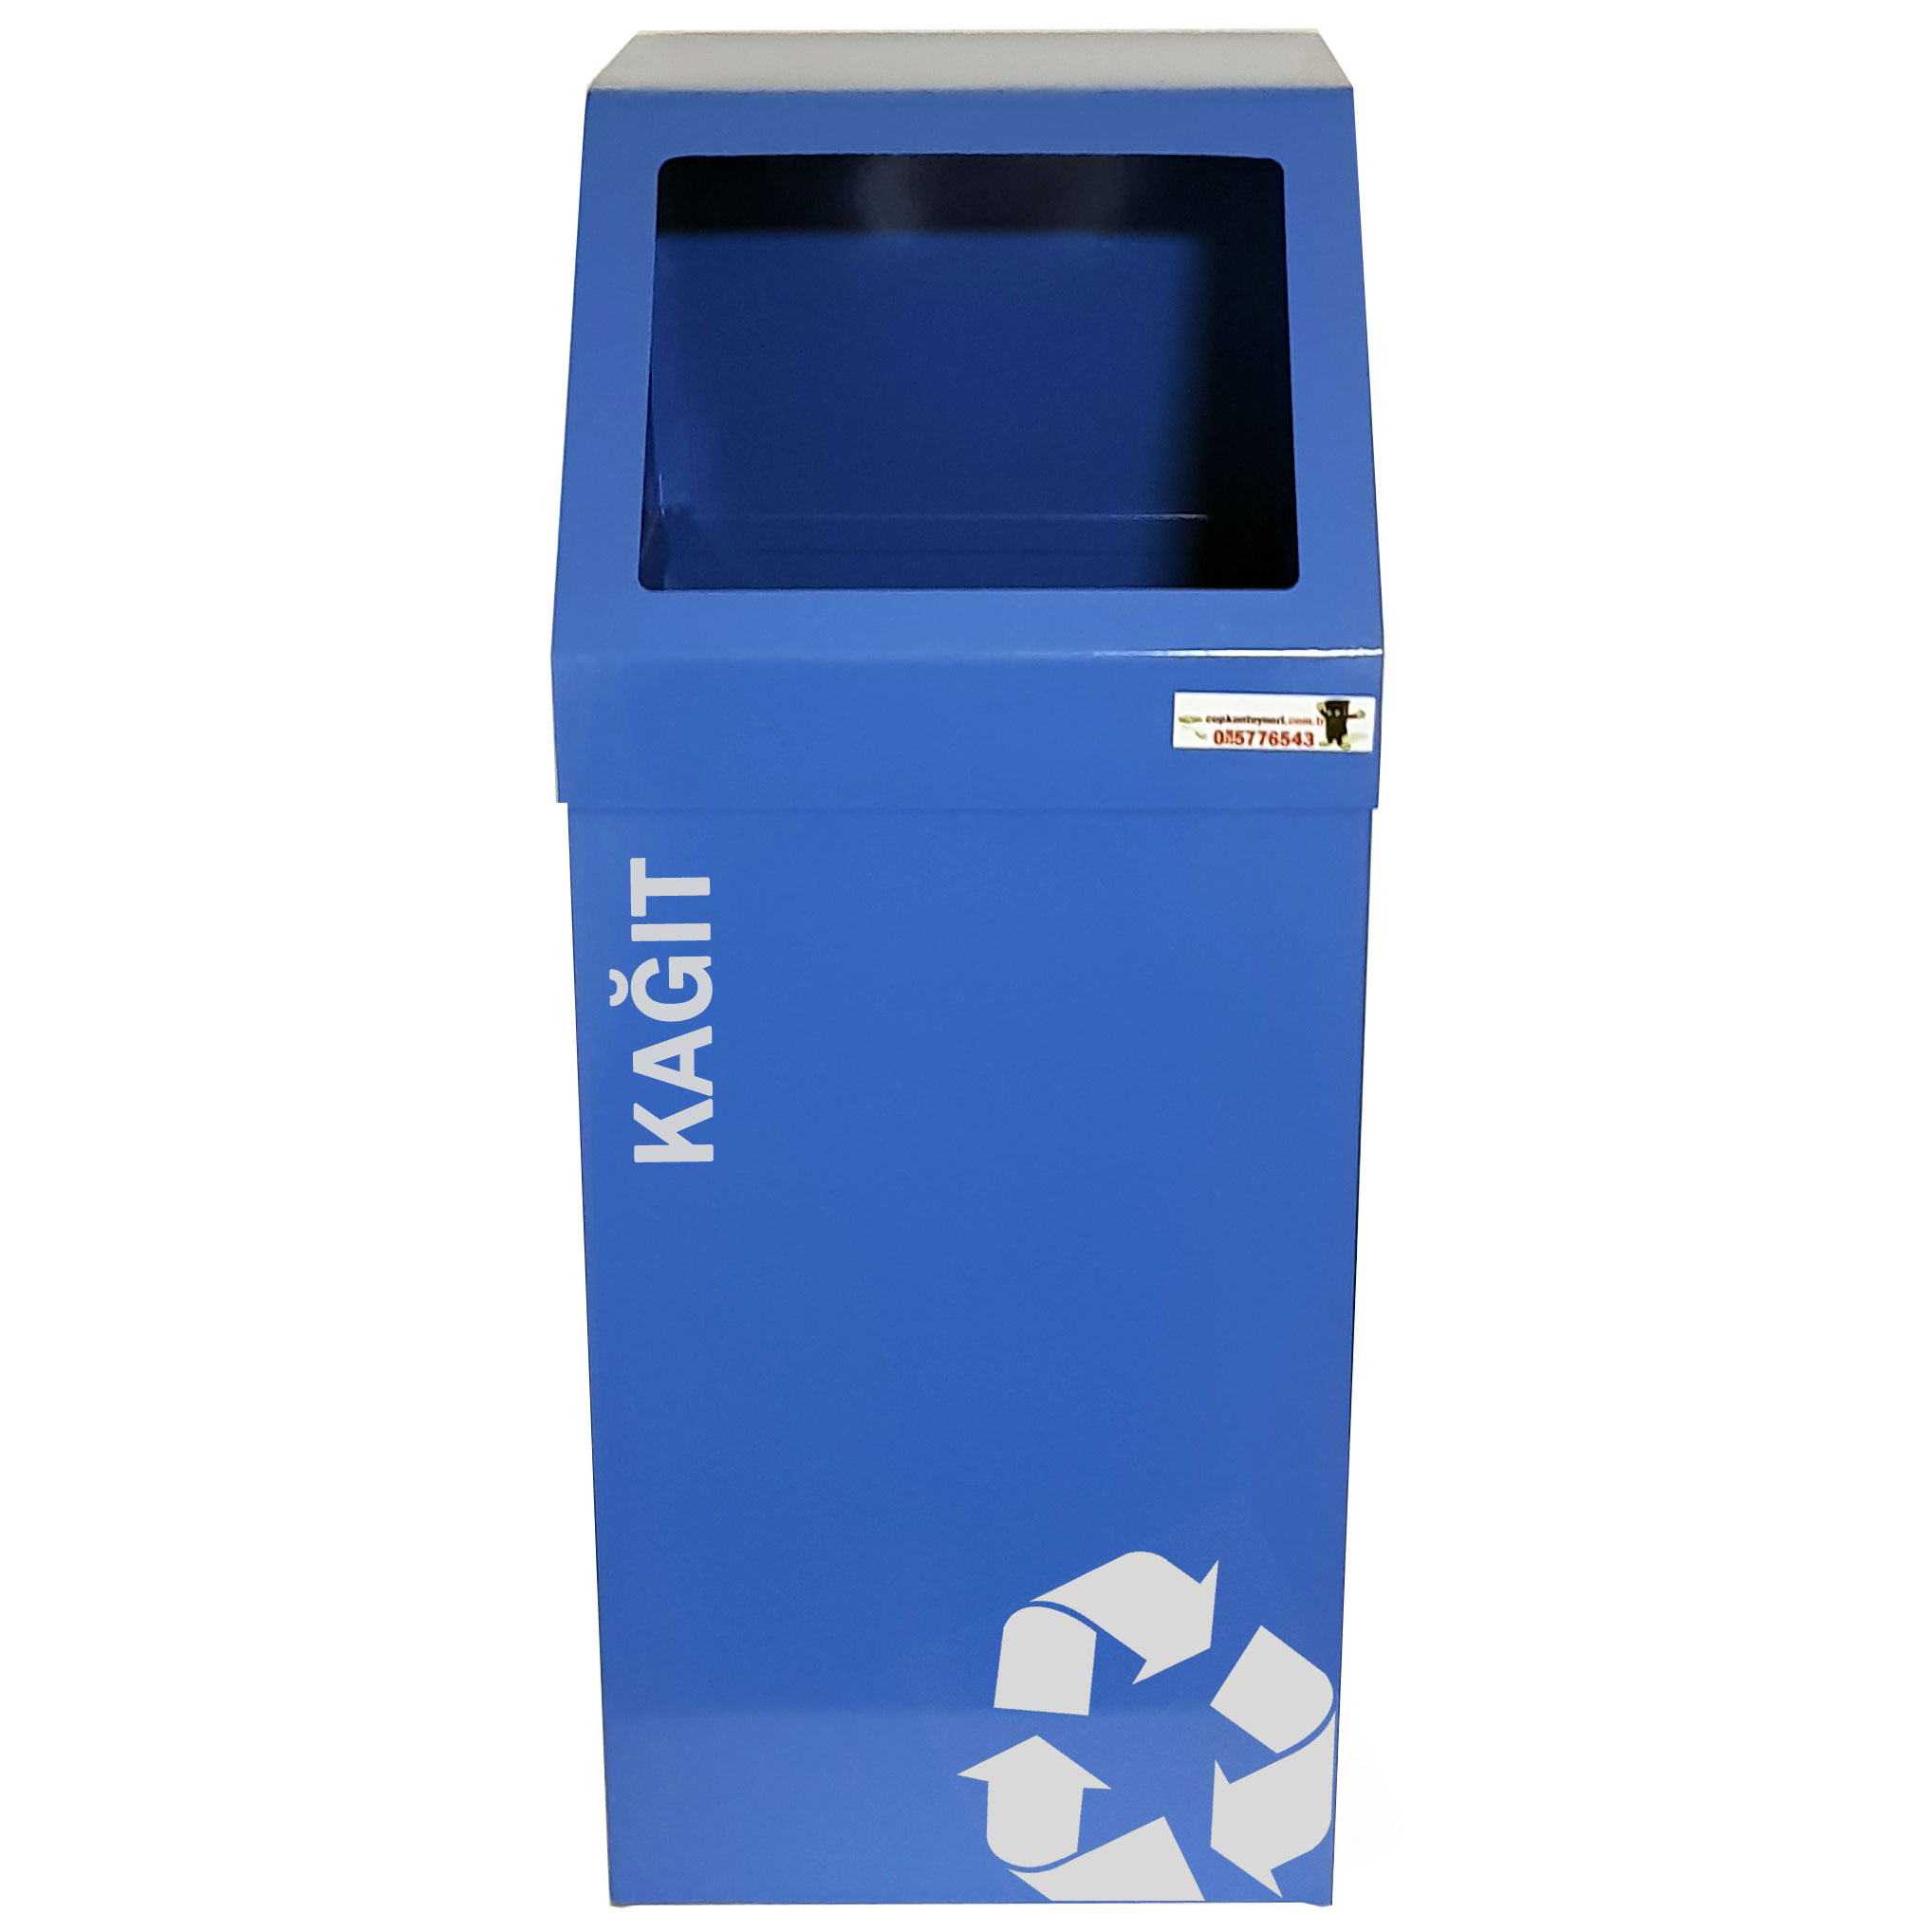 Recycle Bin for paper